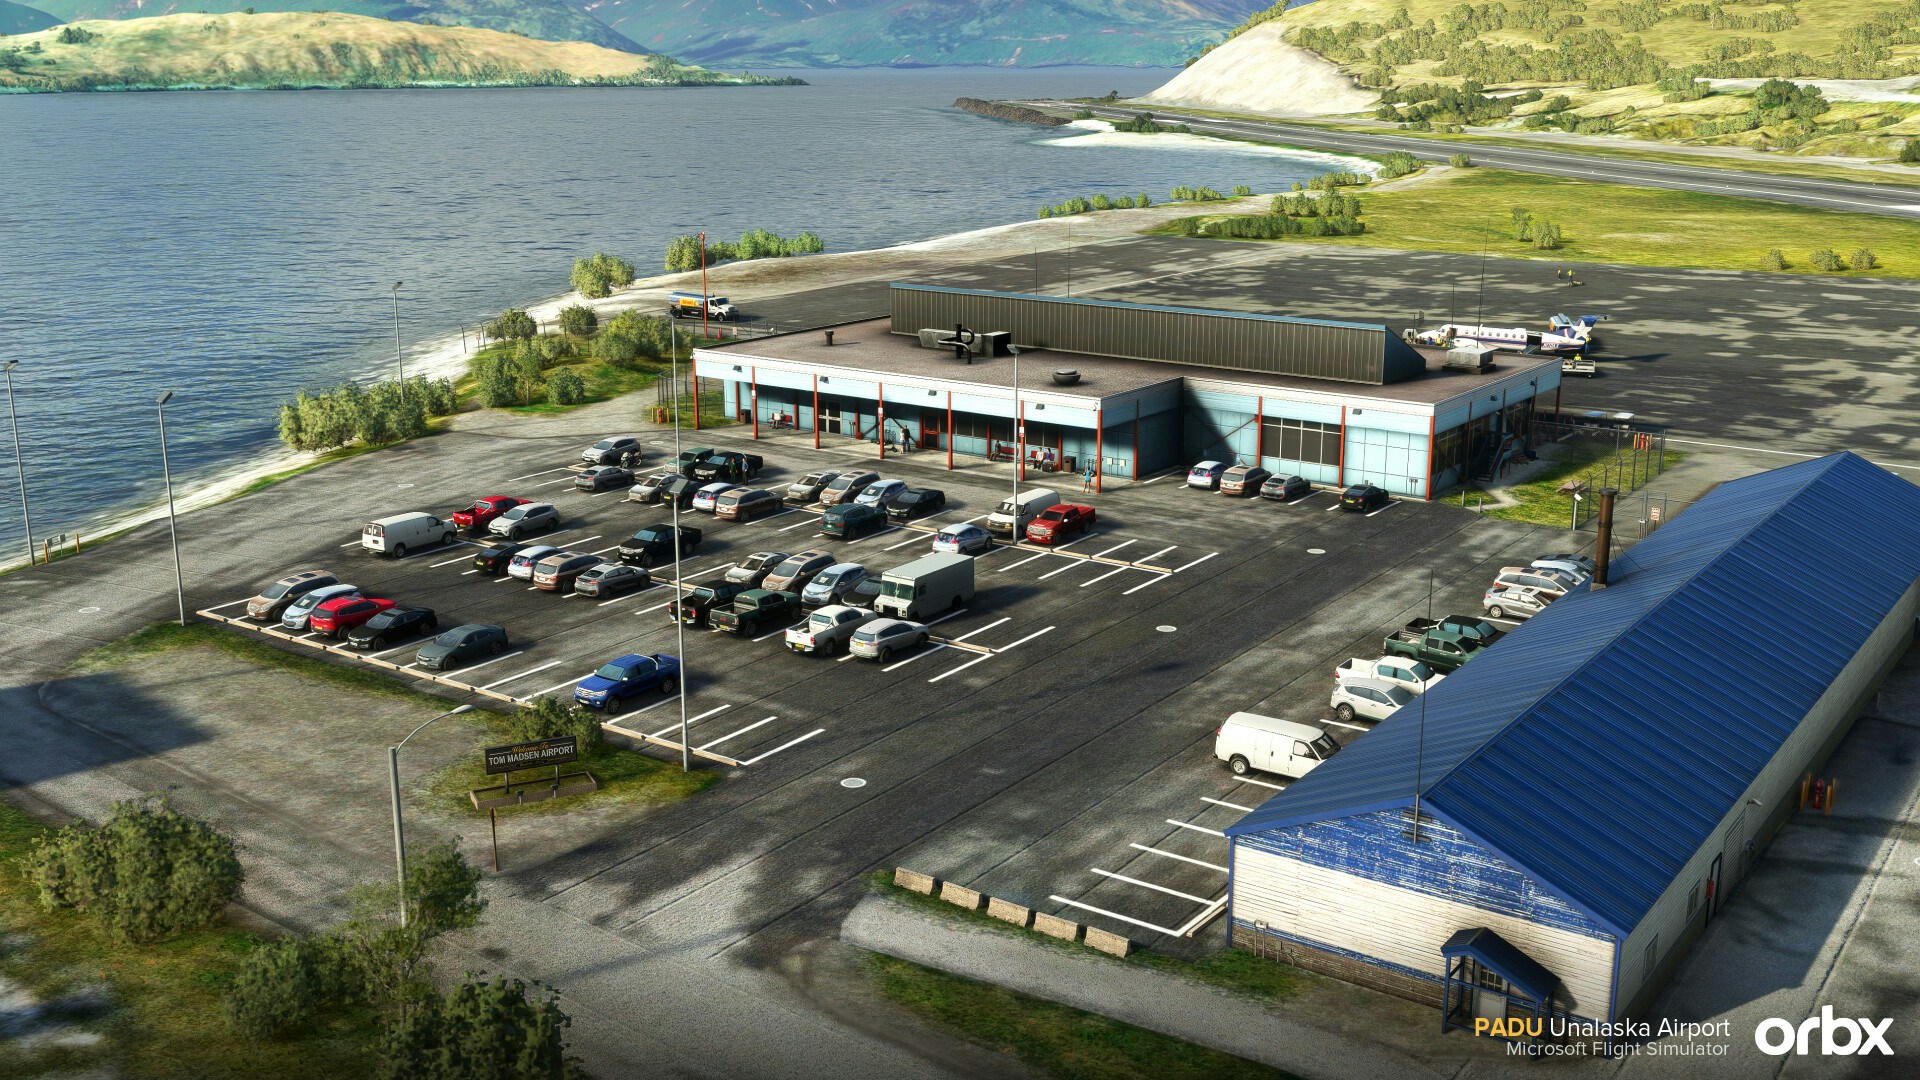 Orbx releases Unalaska Airport for MSFS